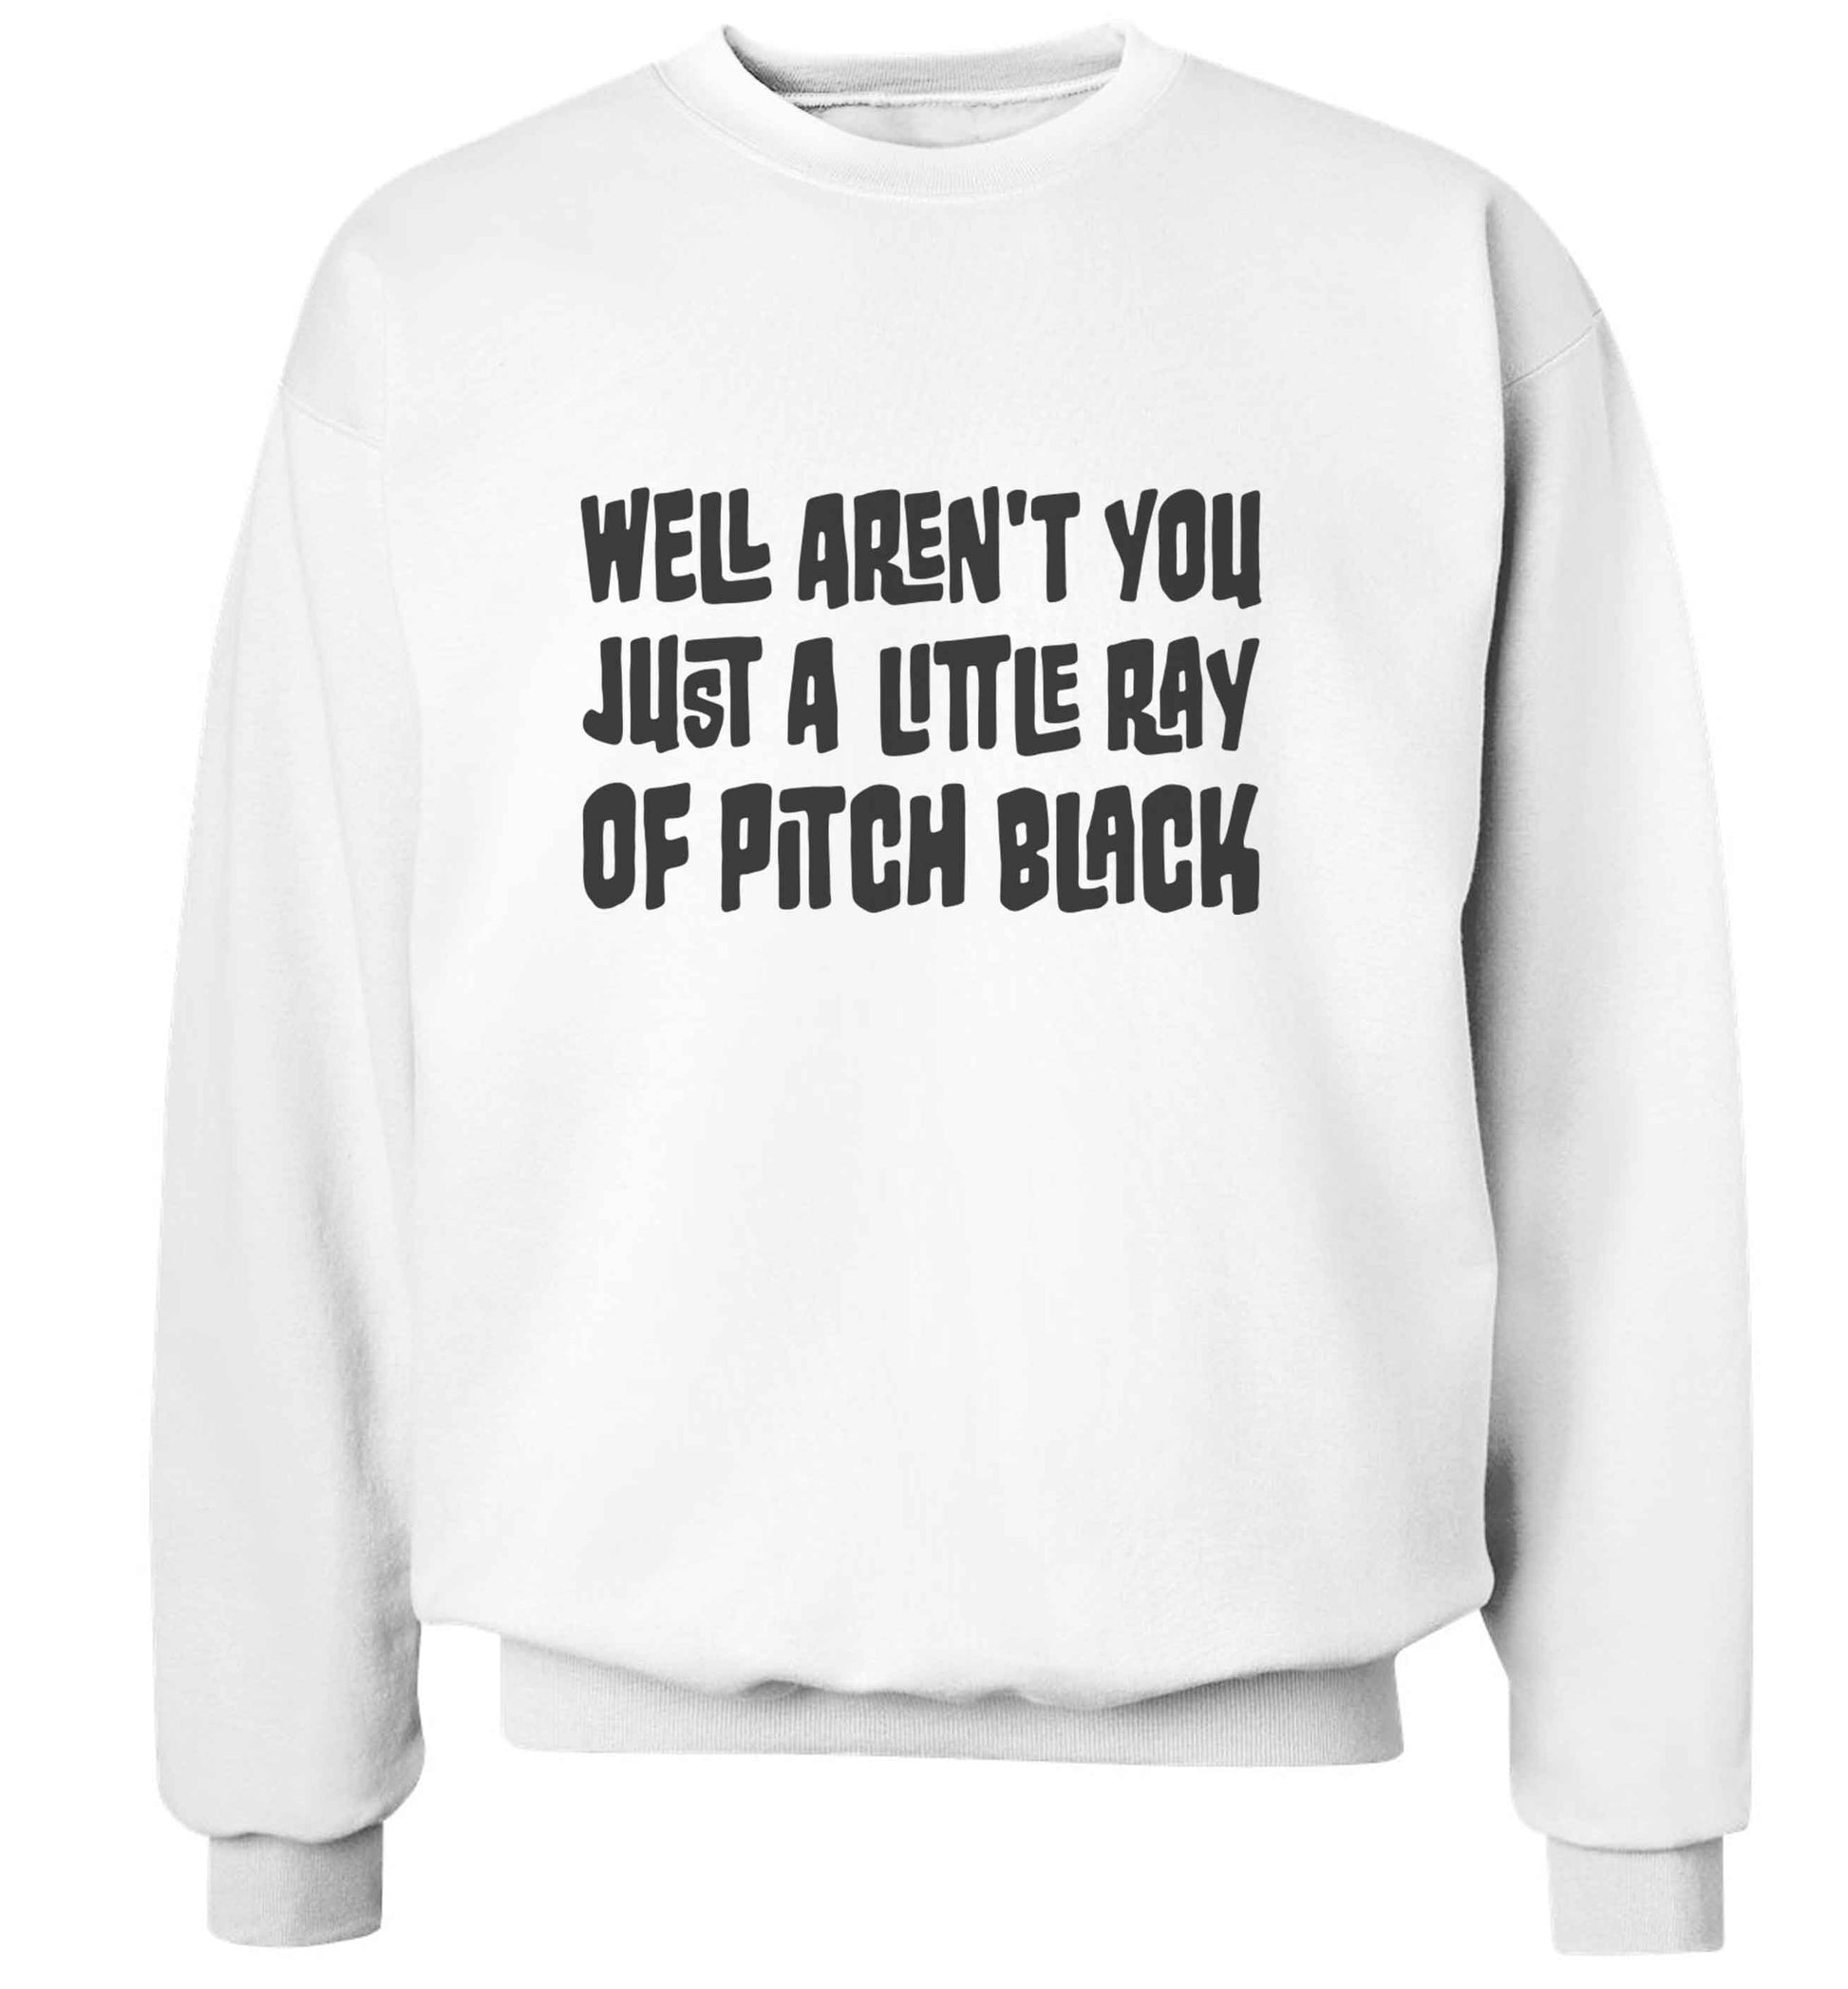 Well aren't you just a little ray of pitch black Kit adult's unisex white sweater 2XL